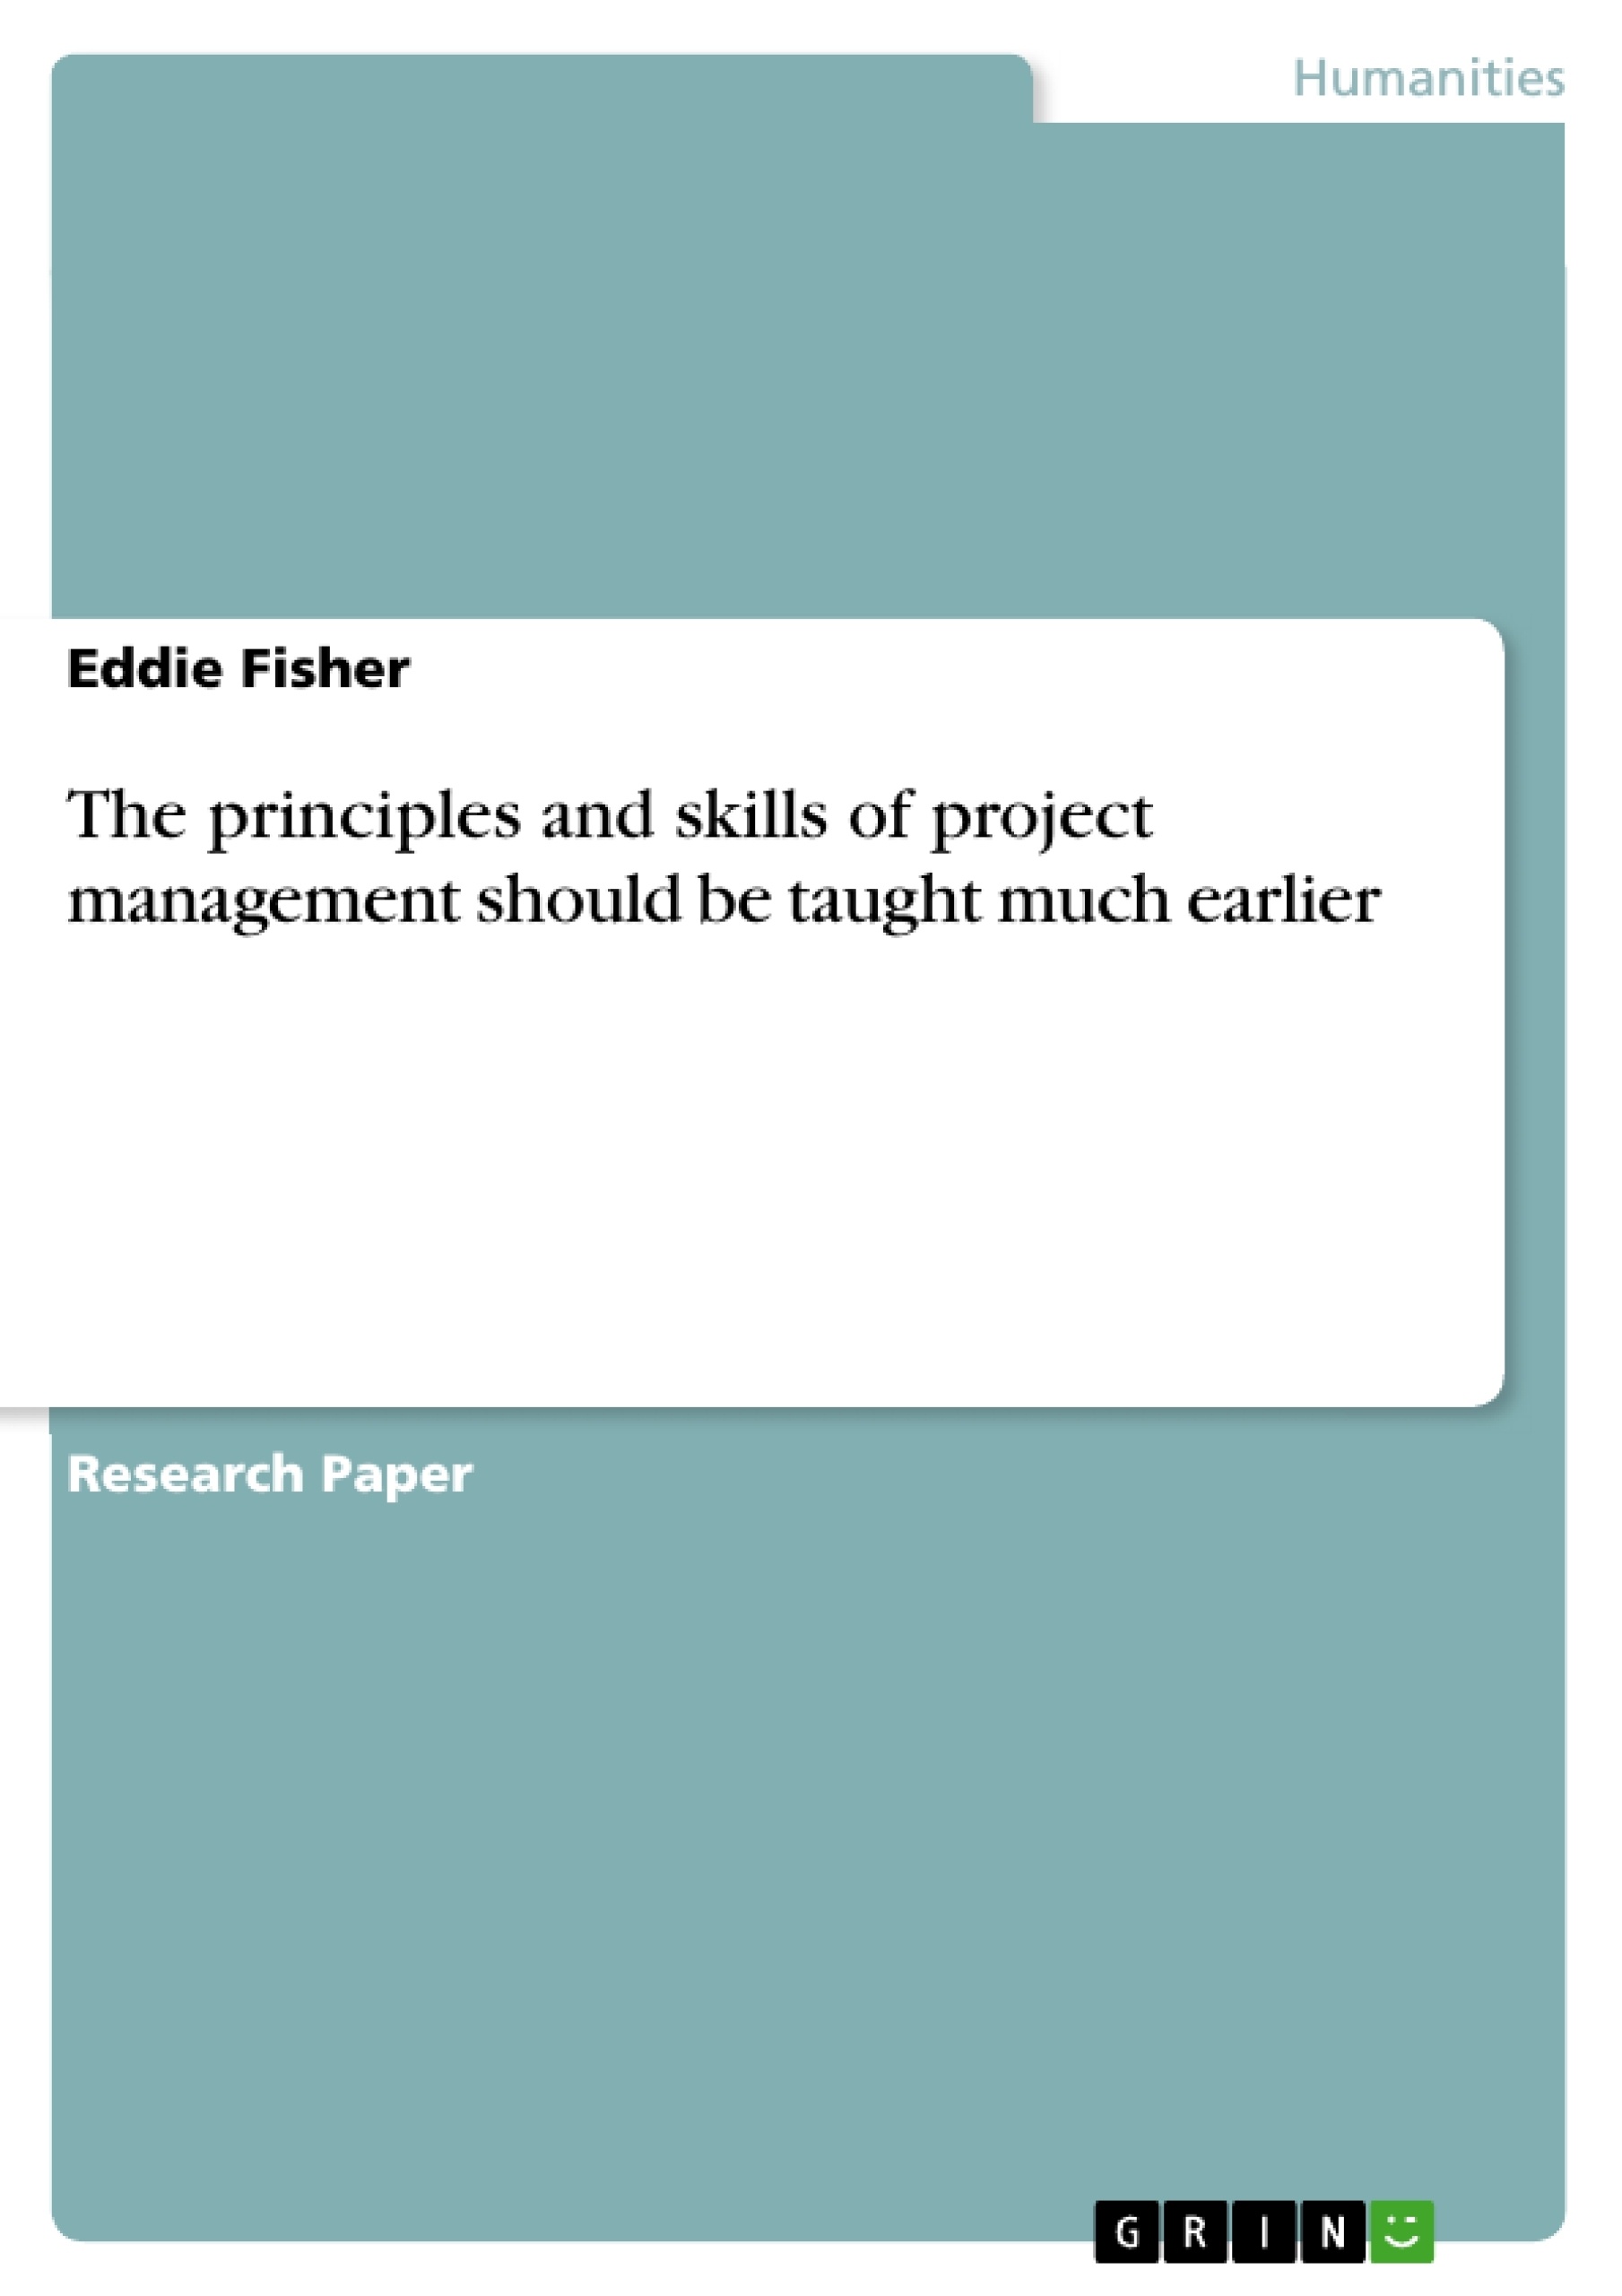 Titre: The principles and skills of project management should be taught much earlier